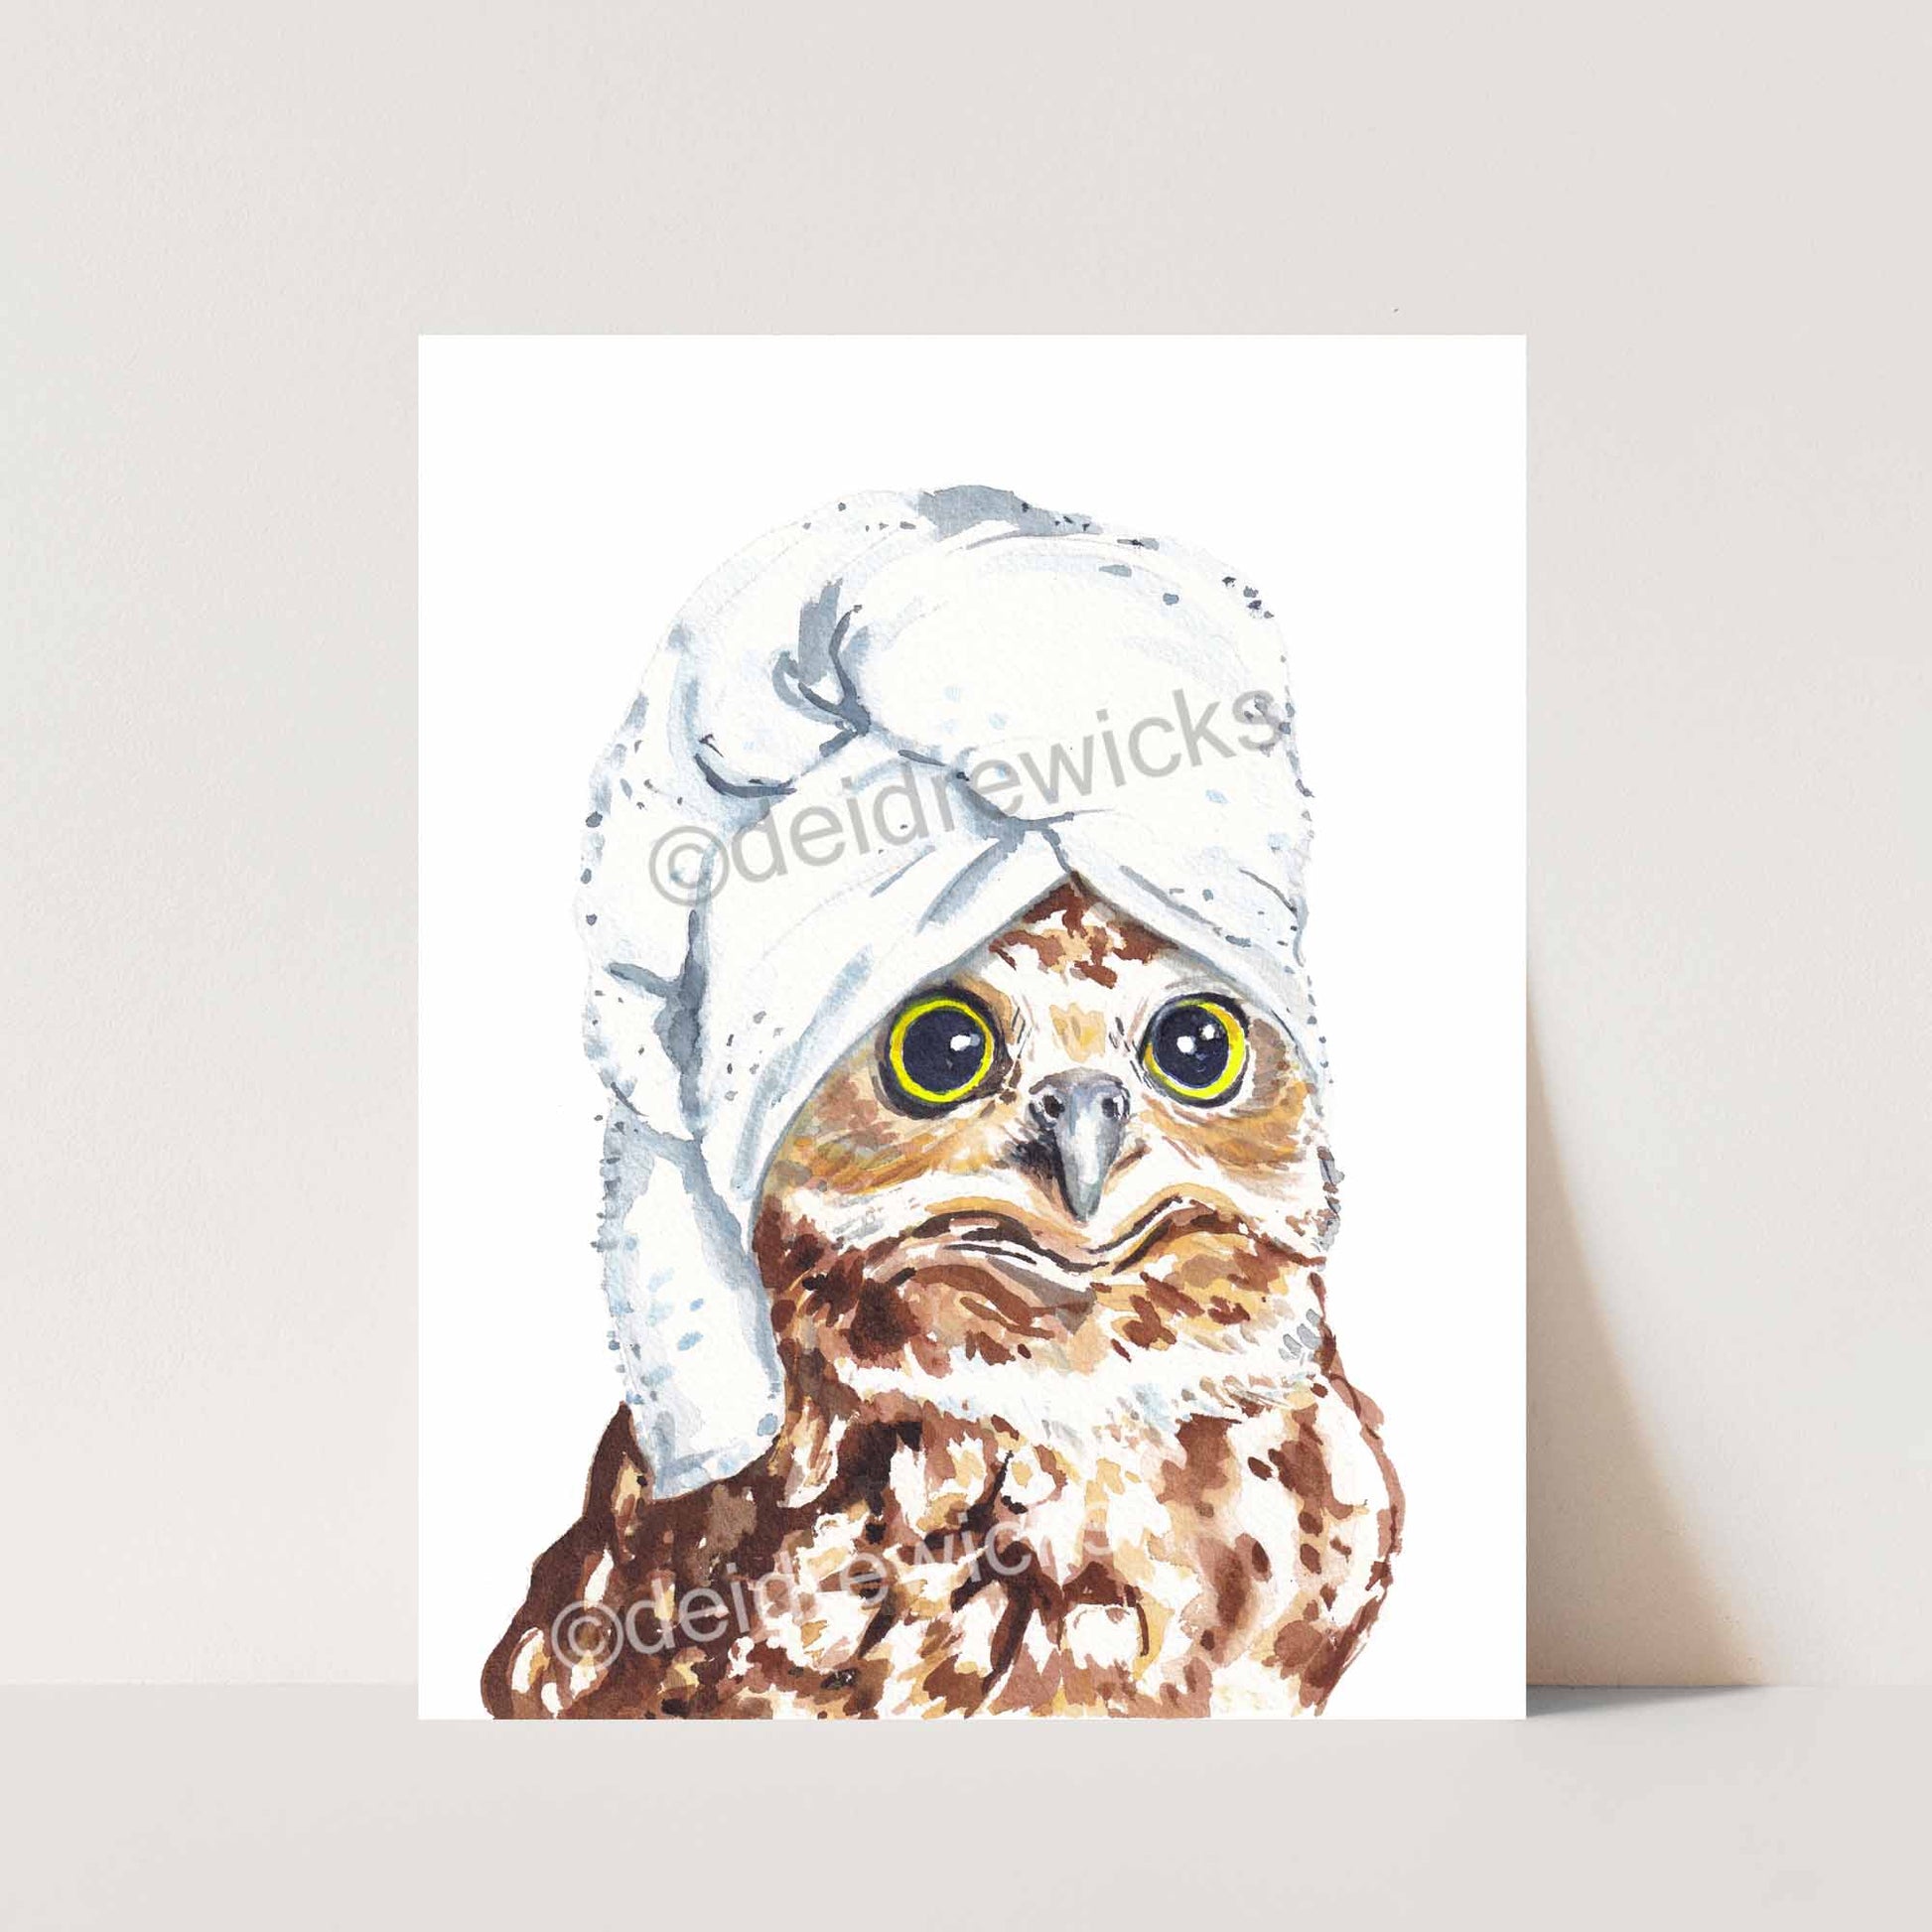 Owl watercolouring painting Print. Even owls need a day at the spa, Art by Deidre Wicks